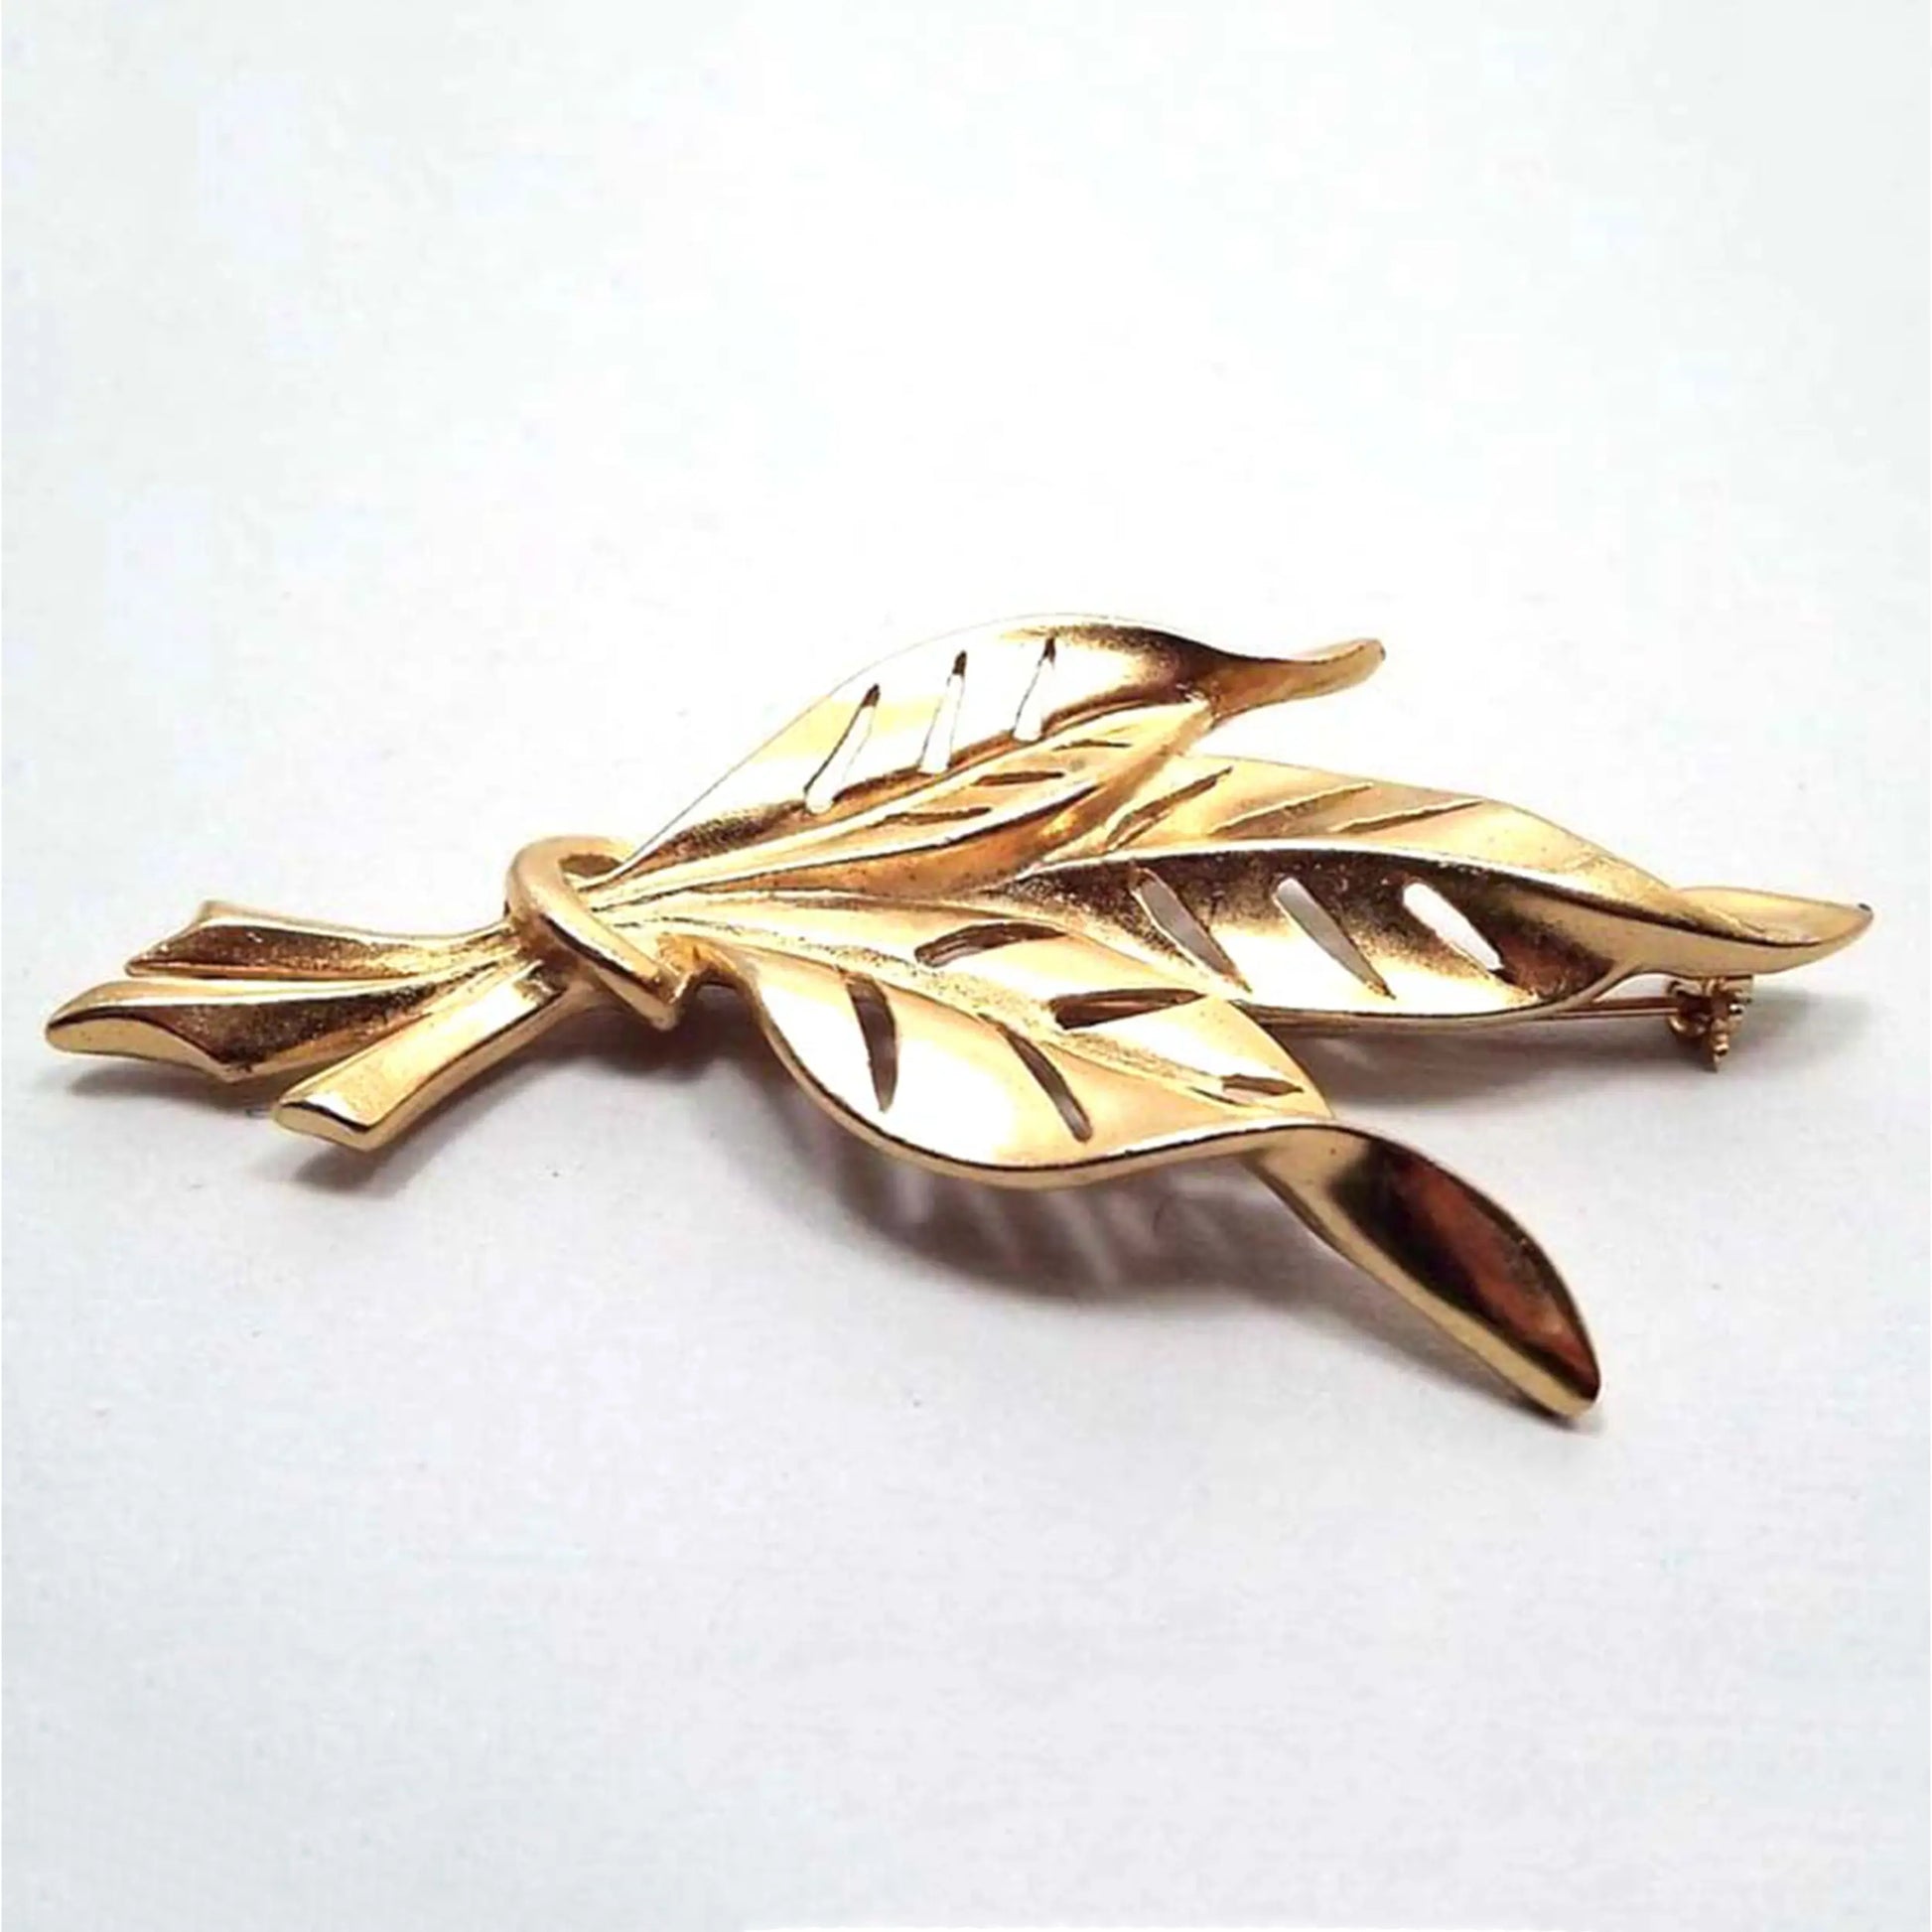 Front view of the retro vintage leaf brooch pin. It is matte gold tone in color with three leaves that are curvy with pointed ends and cut out areas for the leaf veins. The bottom stems look like they're tied together to form a bunch.